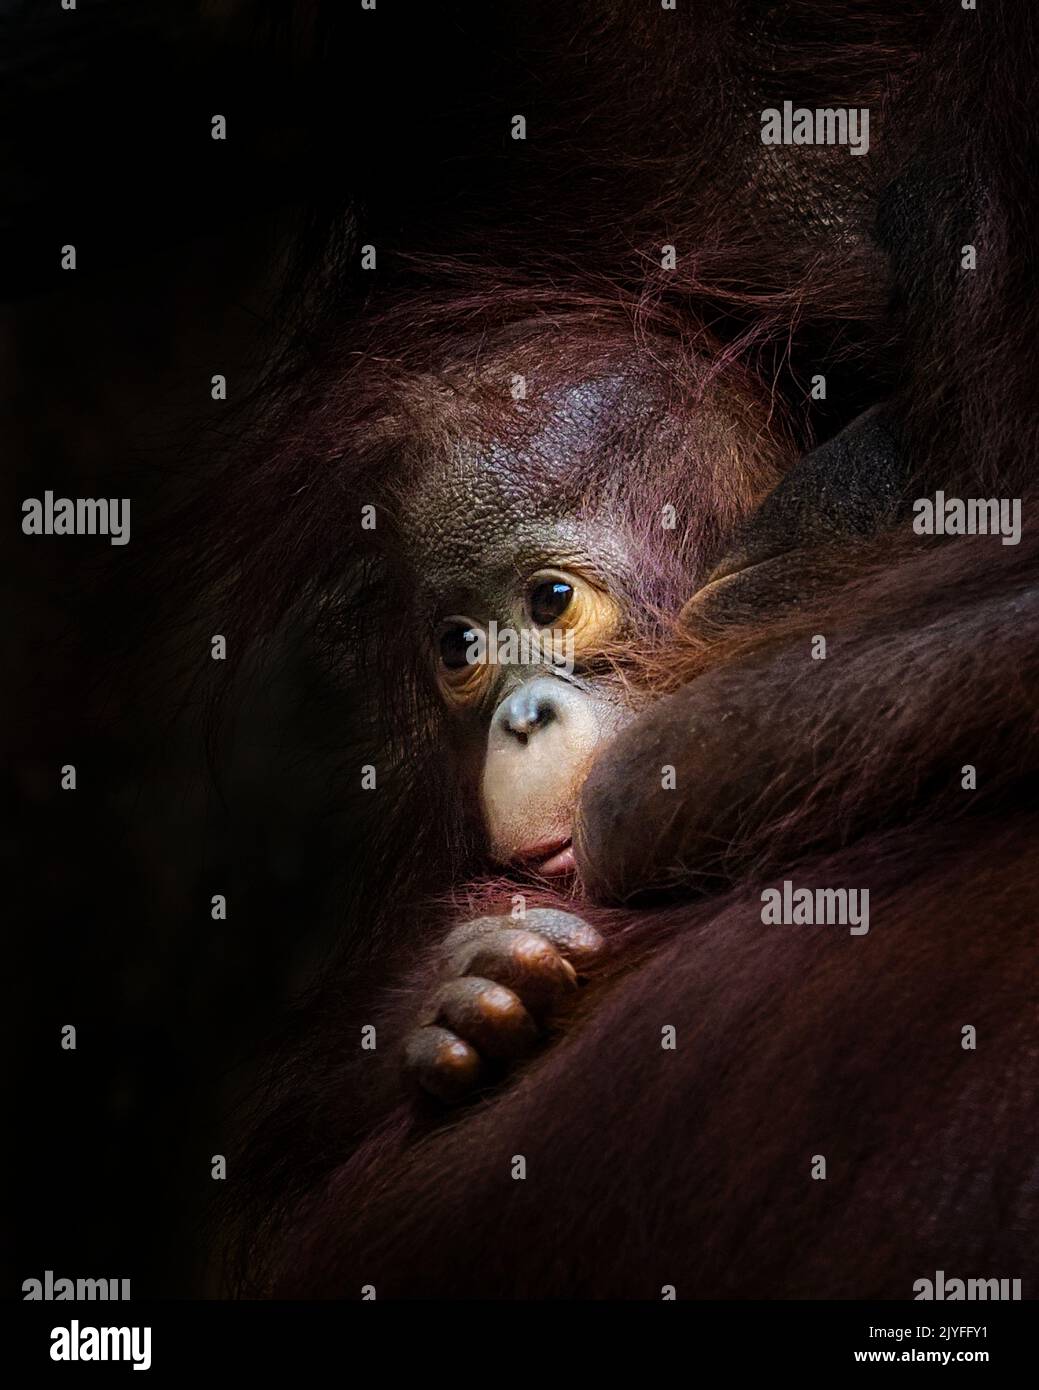 An adorable baby orangutan. Jakarta, Indonesia: ADORABLE IMAGES show a baby orangutan stealing a cheeky ride on its mother?s back. One image shows the Stock Photo